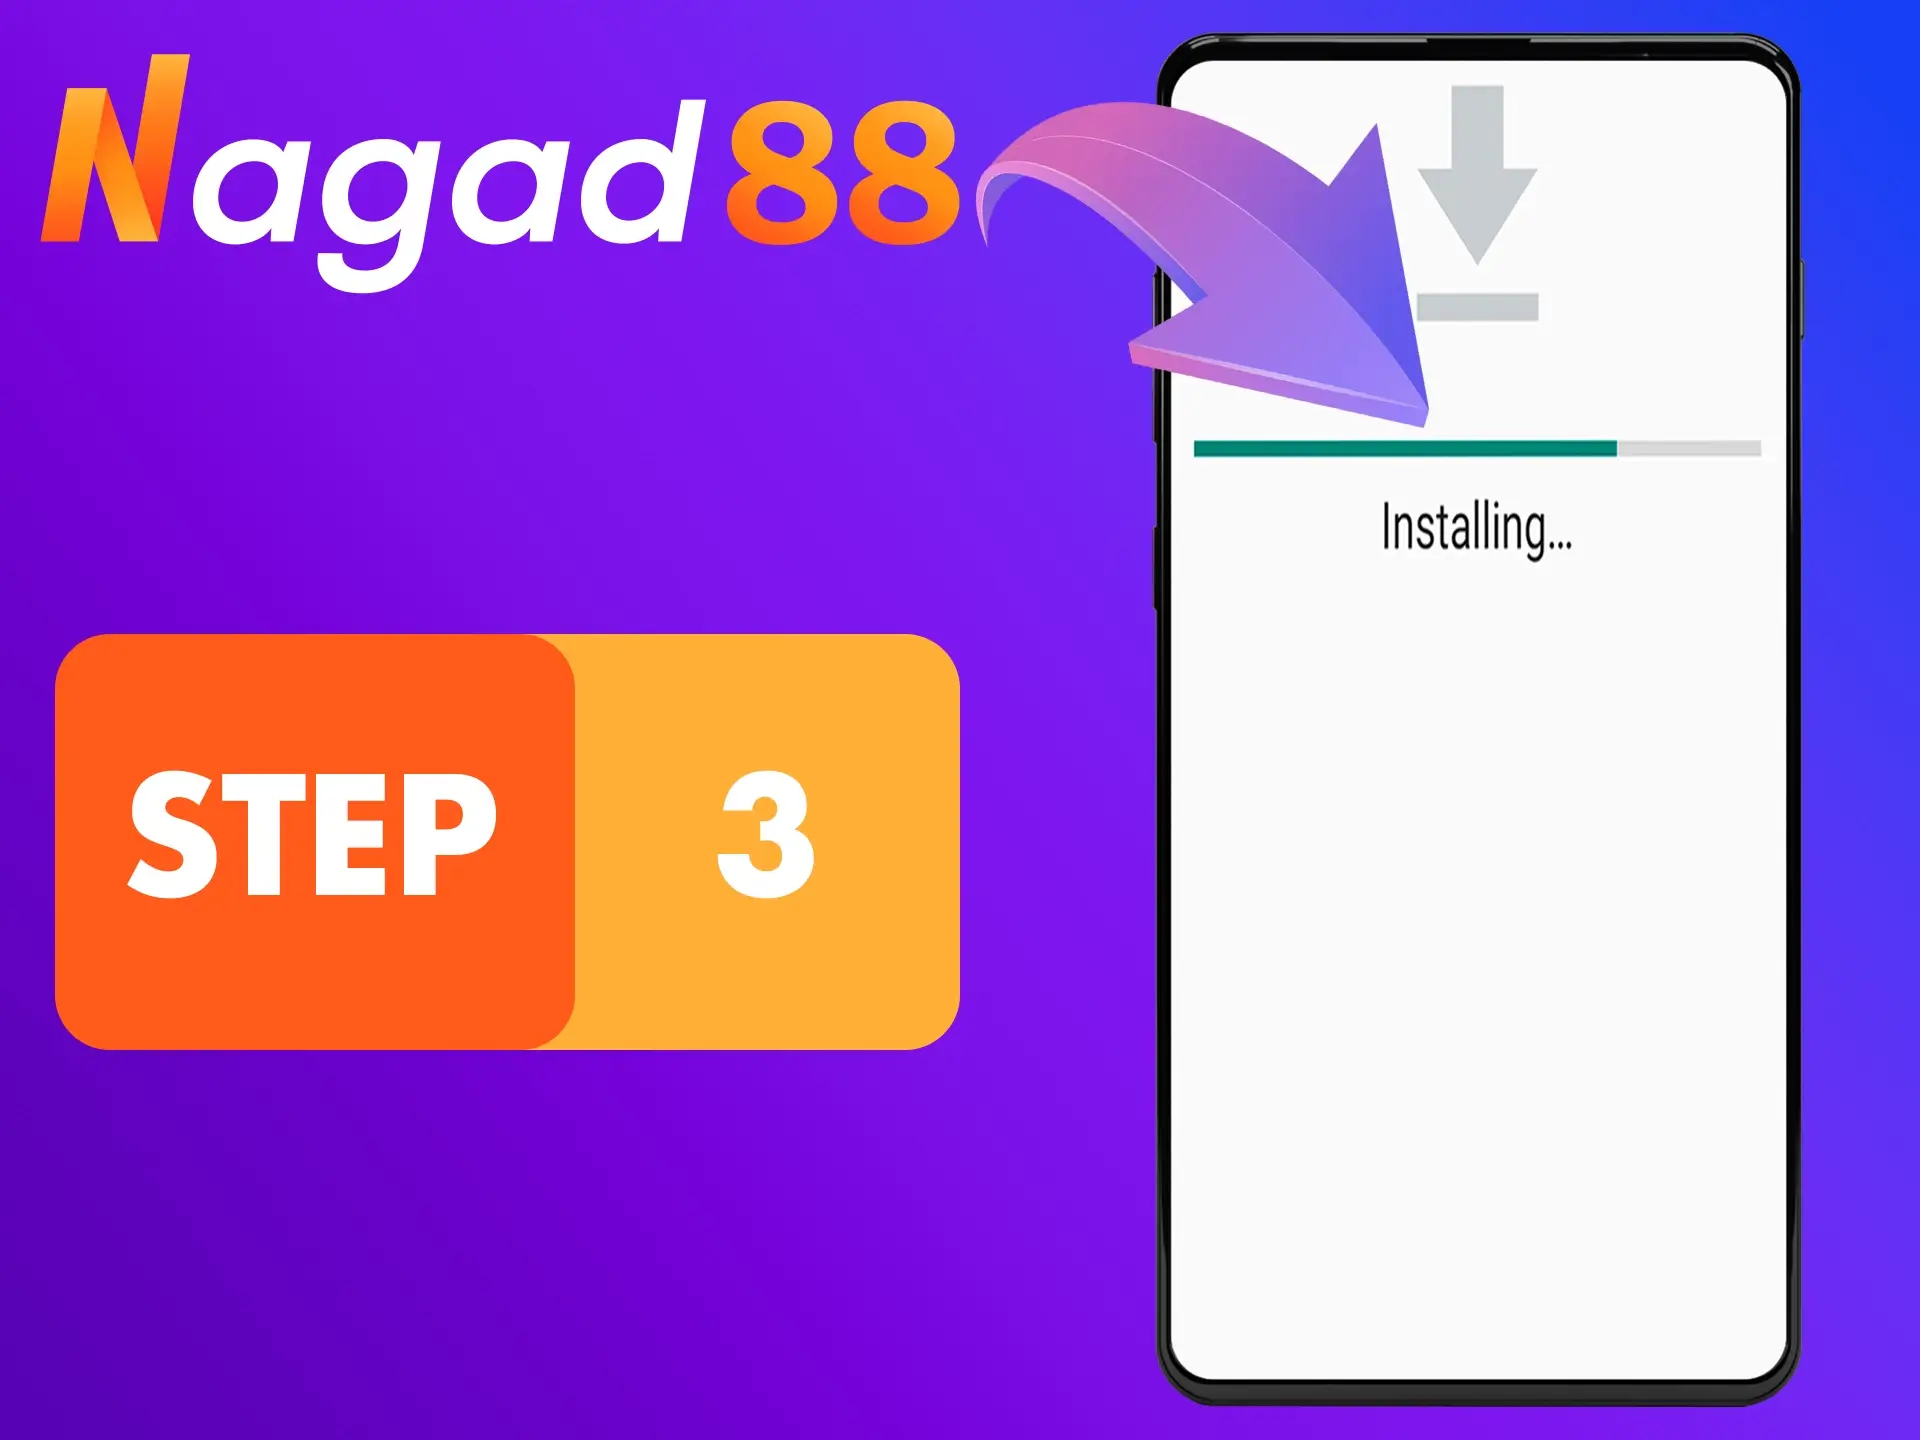 Complete the installation of the Nagad88 application.